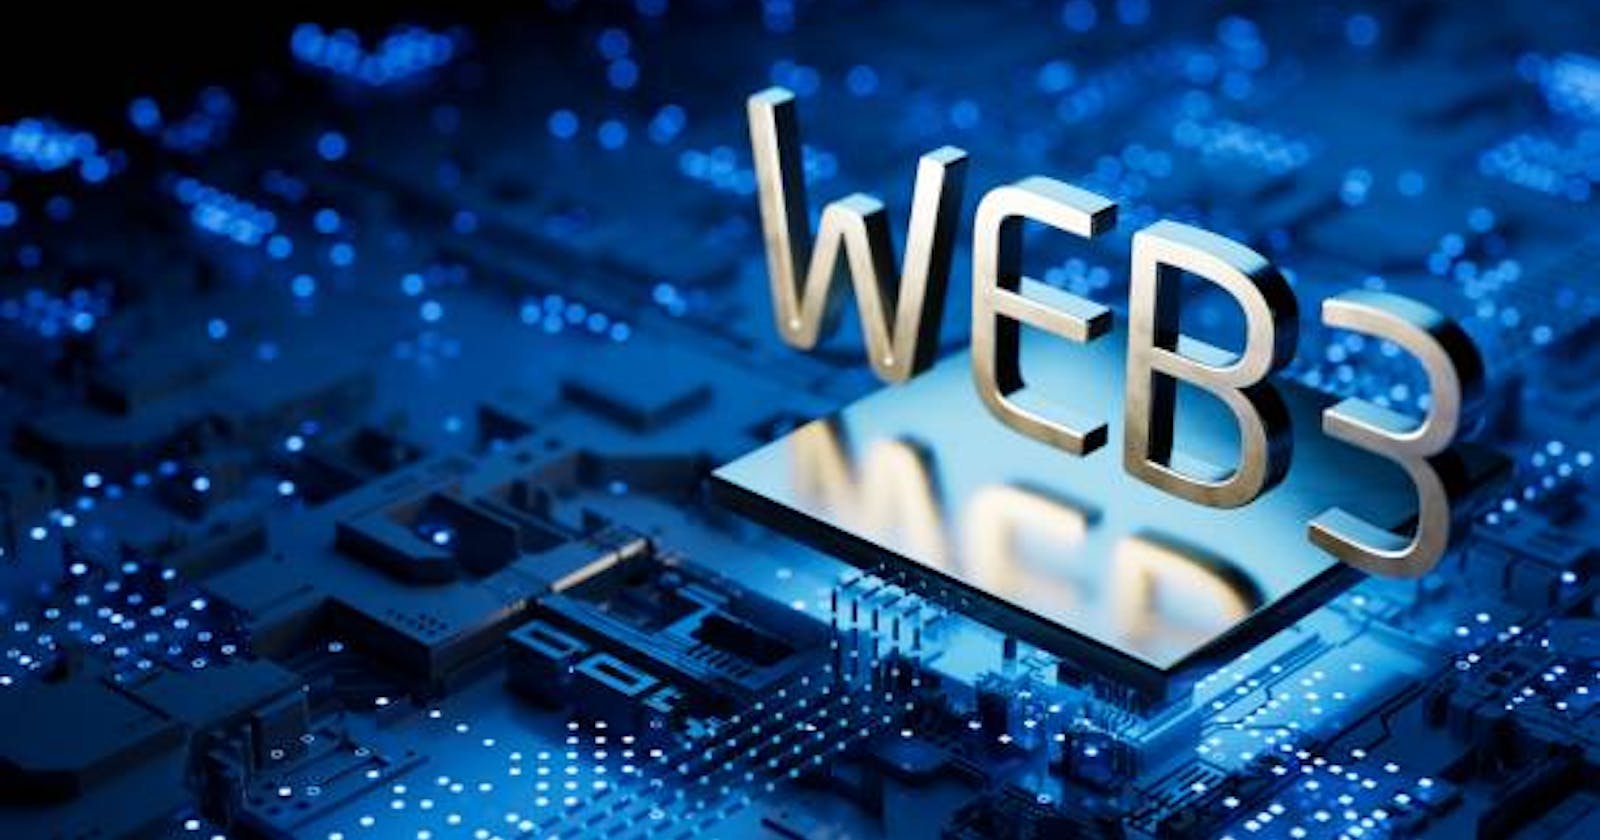 Introduction To Web 3.0